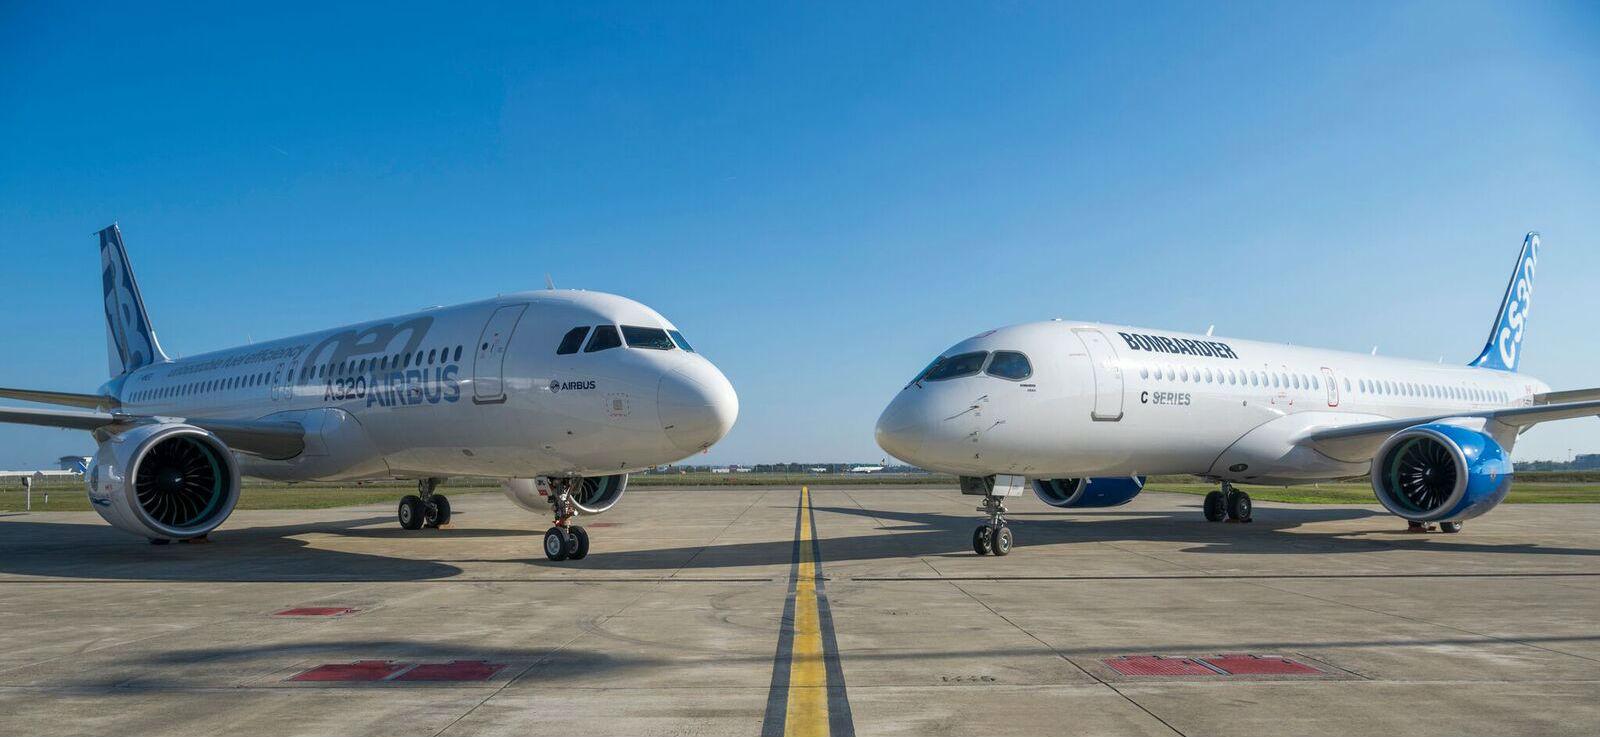 Airbus, Bombardier and the C Series: Understanding the ABCs